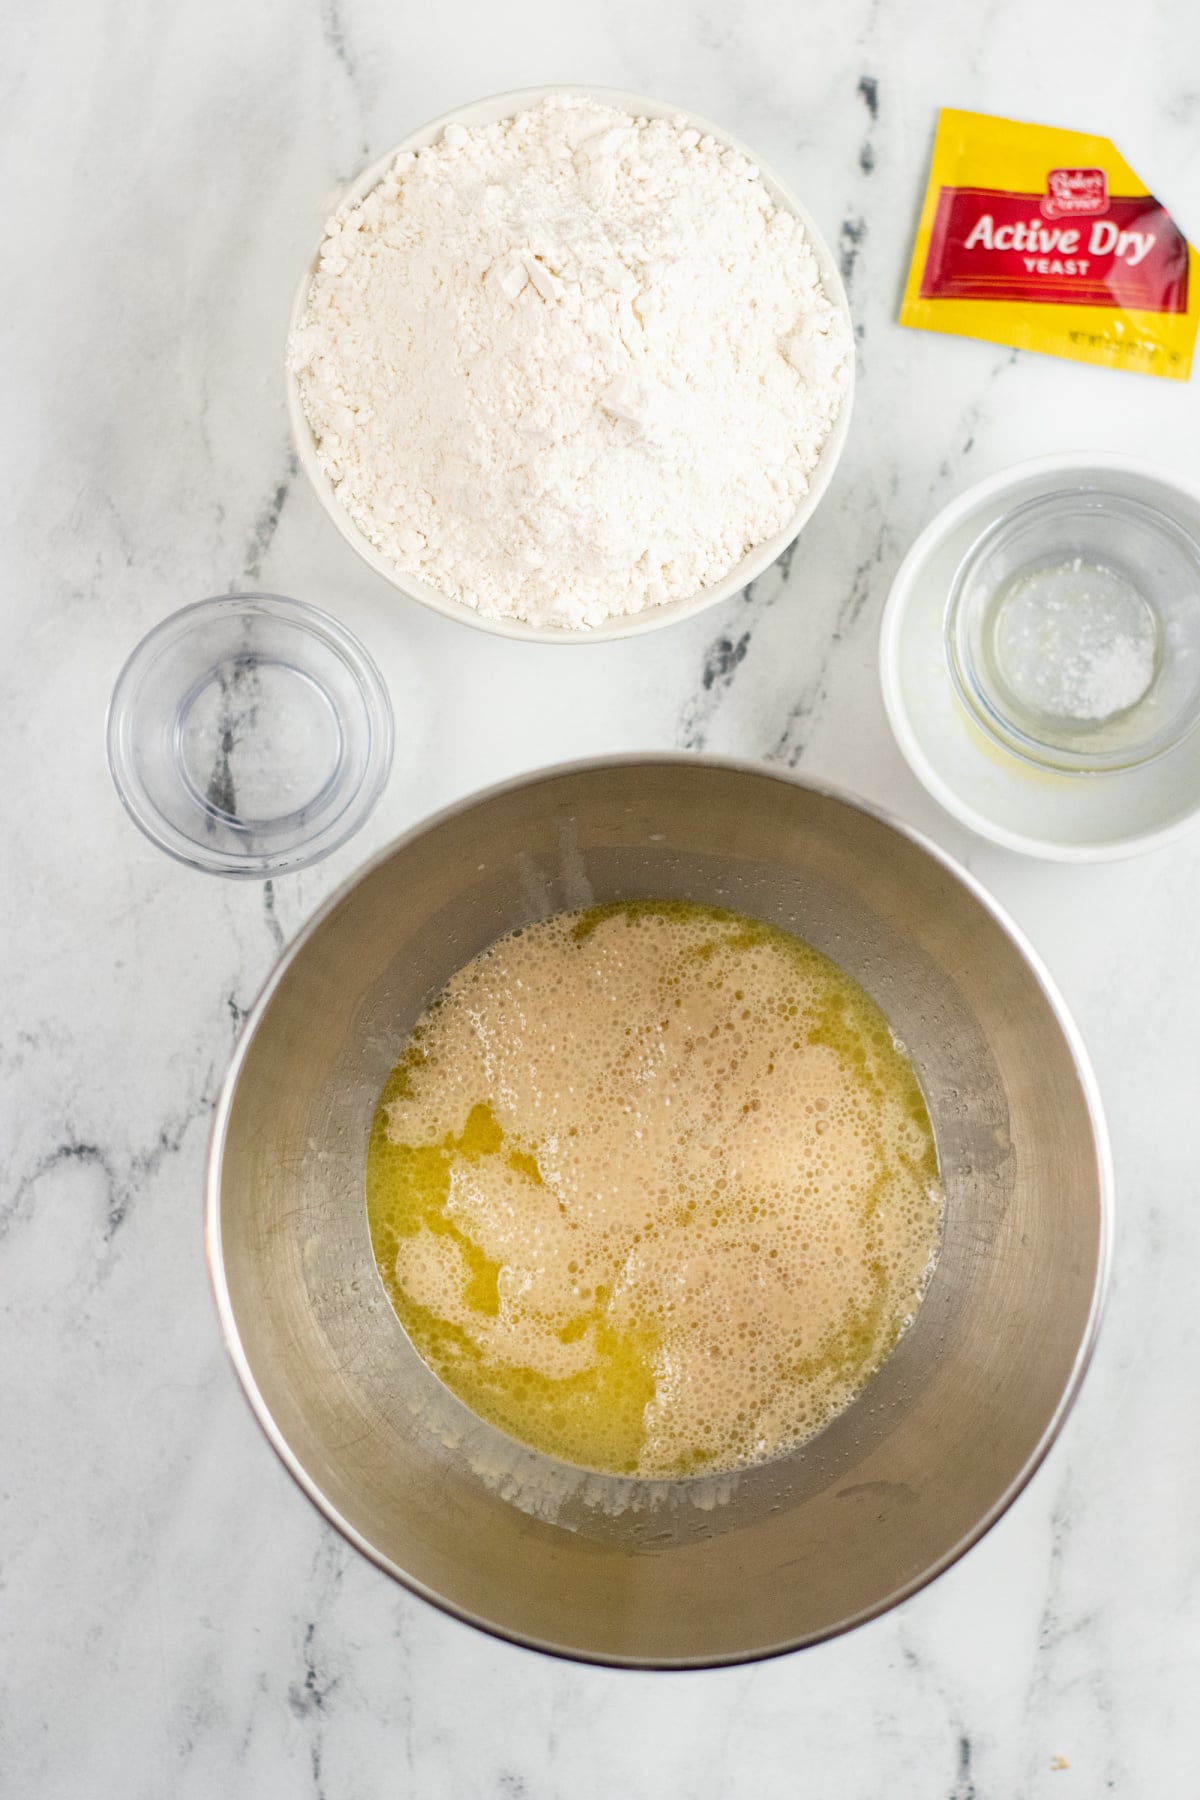 Yeast mixture with butter and salt